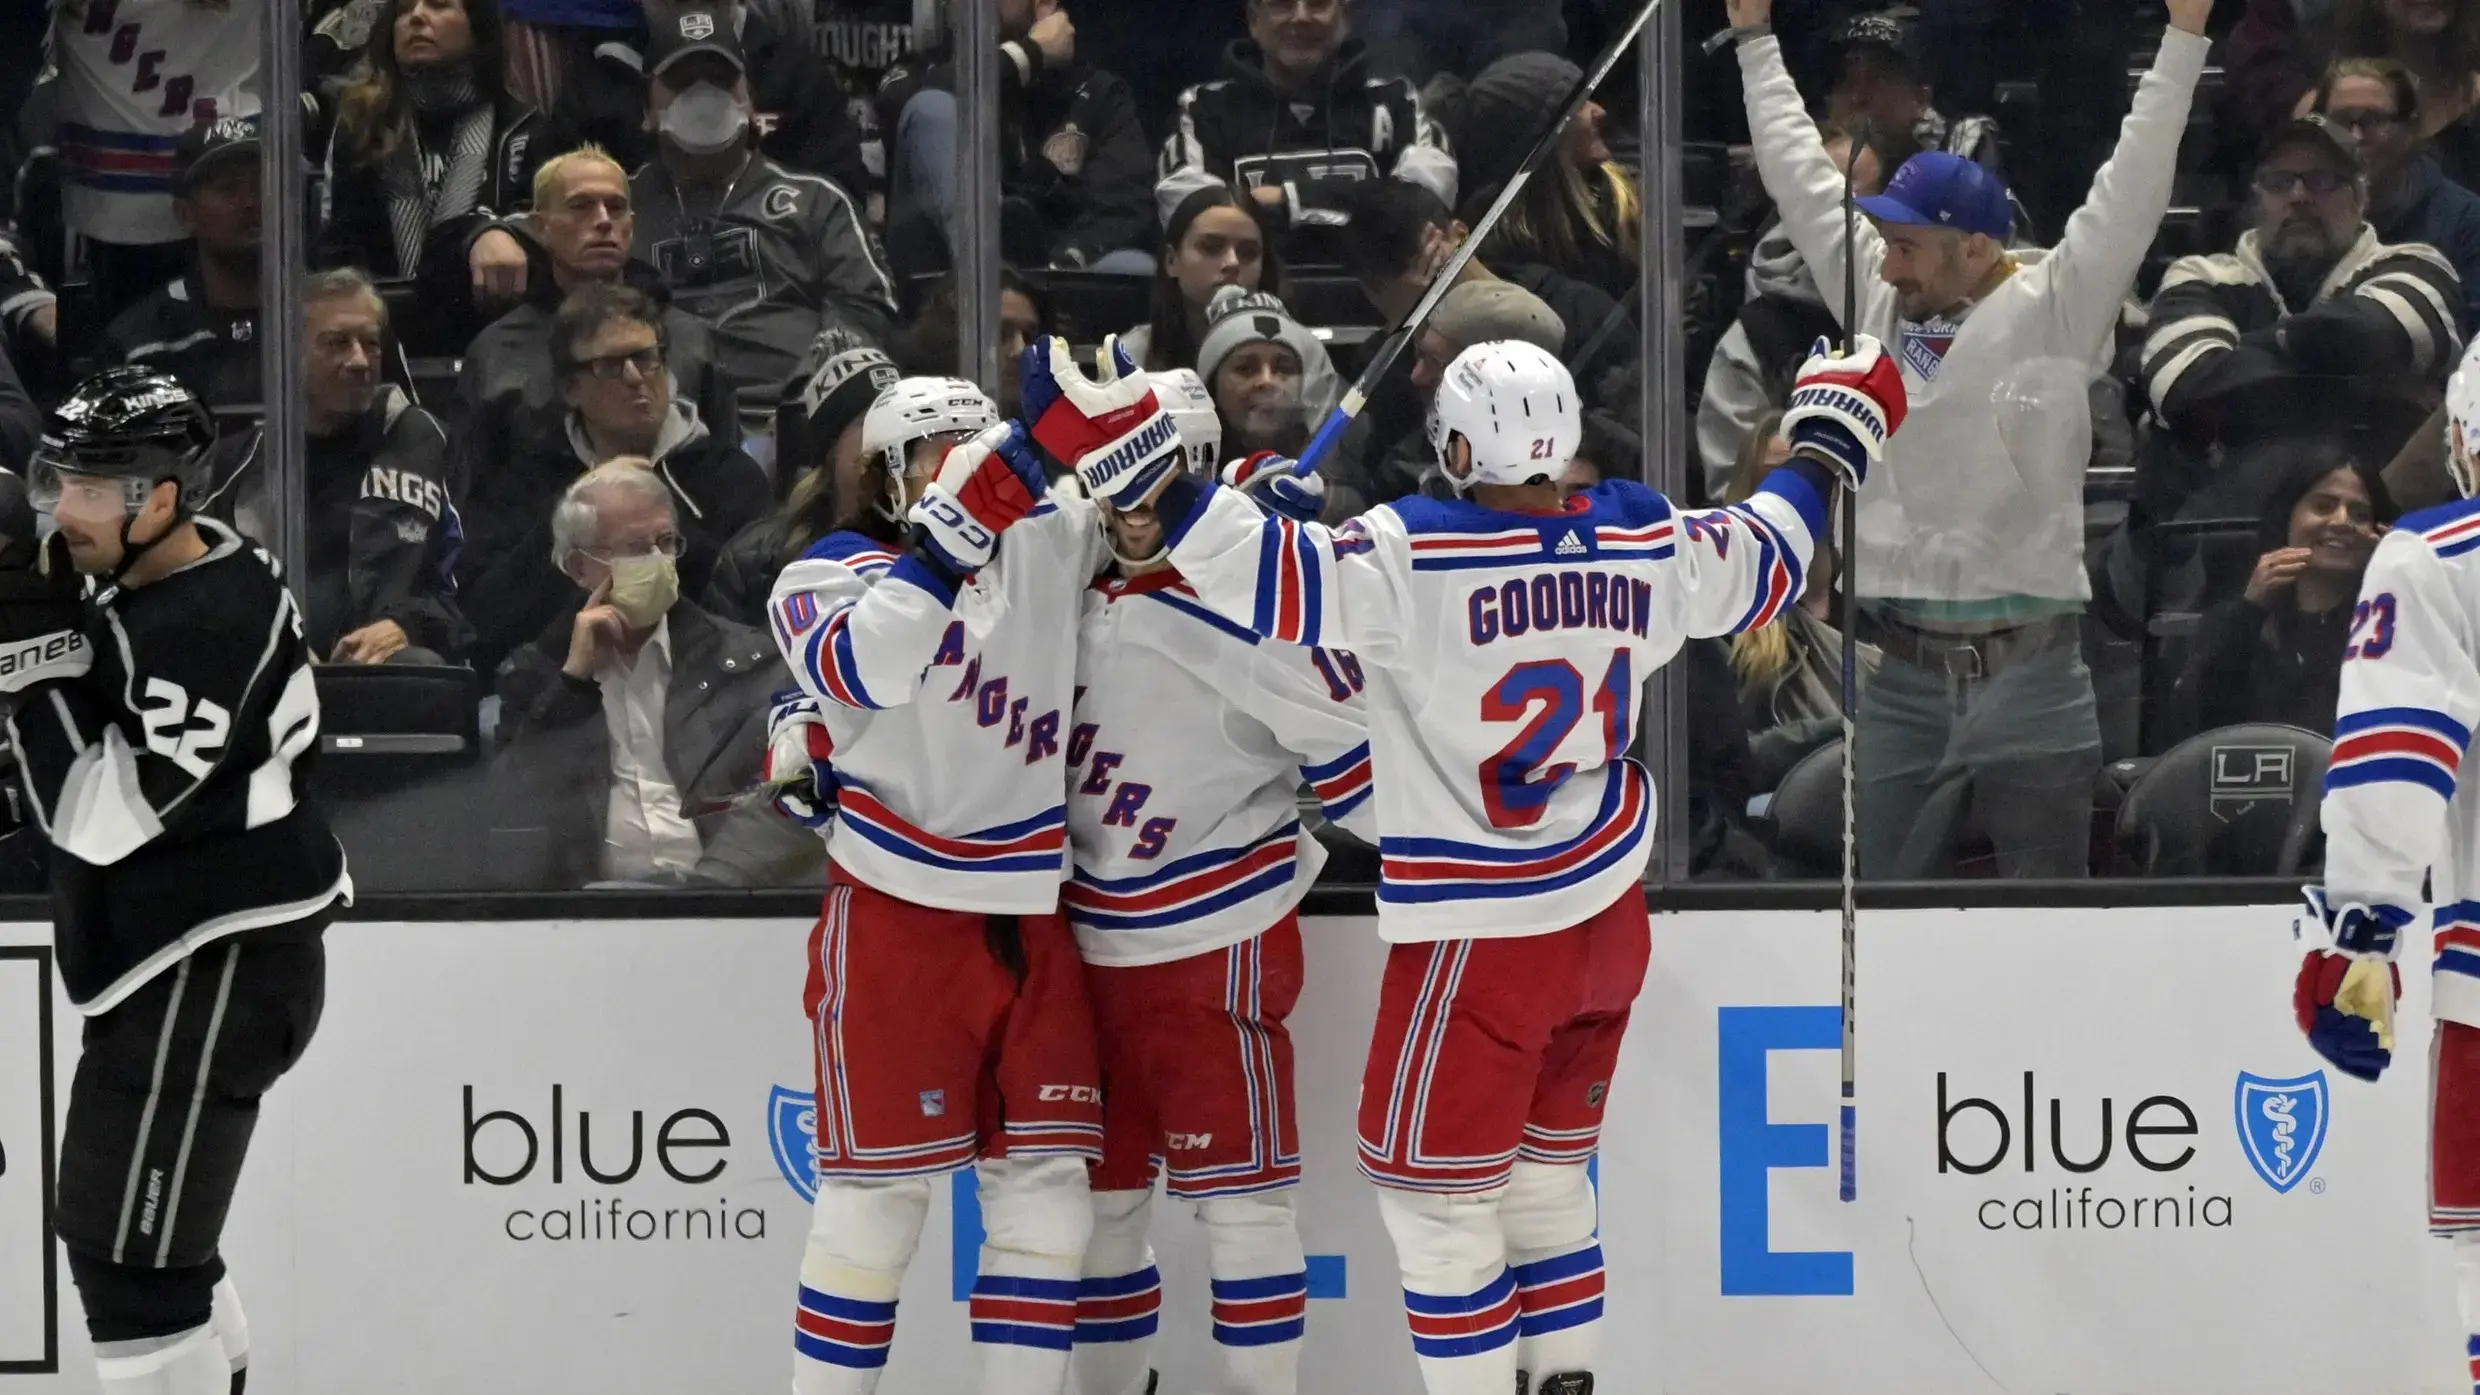 Nov 22, 2022; Los Angeles, California, USA; The New York Rangers celebrate after scoring a goal in the second period against the Los Angeles Kings at Crypto.com Arena. / Jayne Kamin-Oncea-USA TODAY Sports